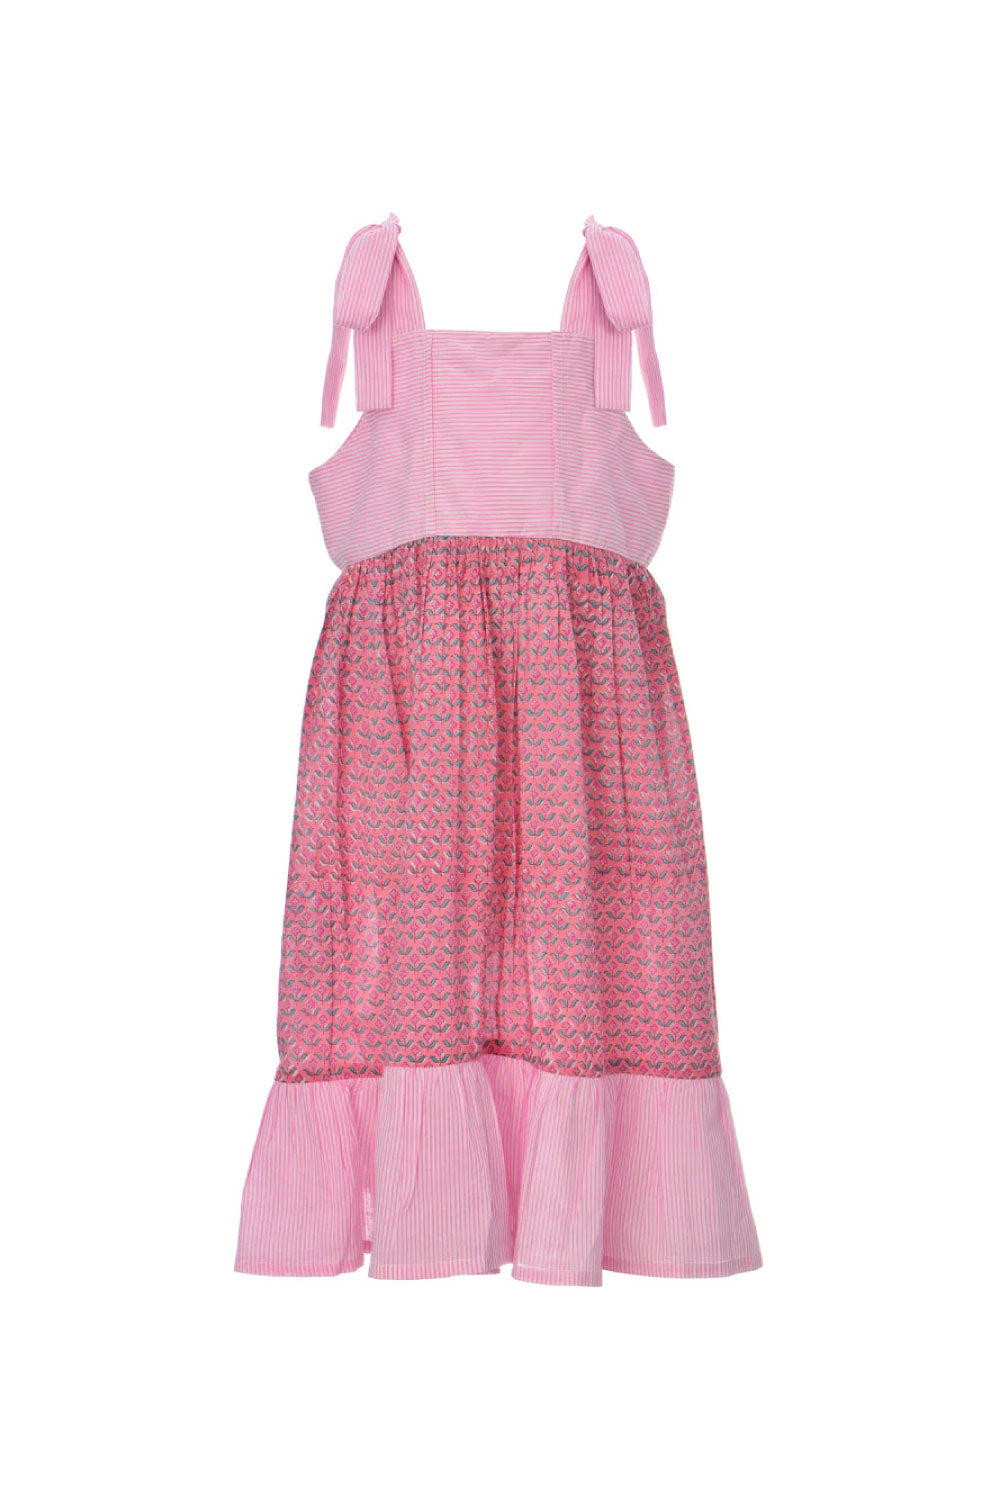 Image of the front of the Misha Dress in Pink.